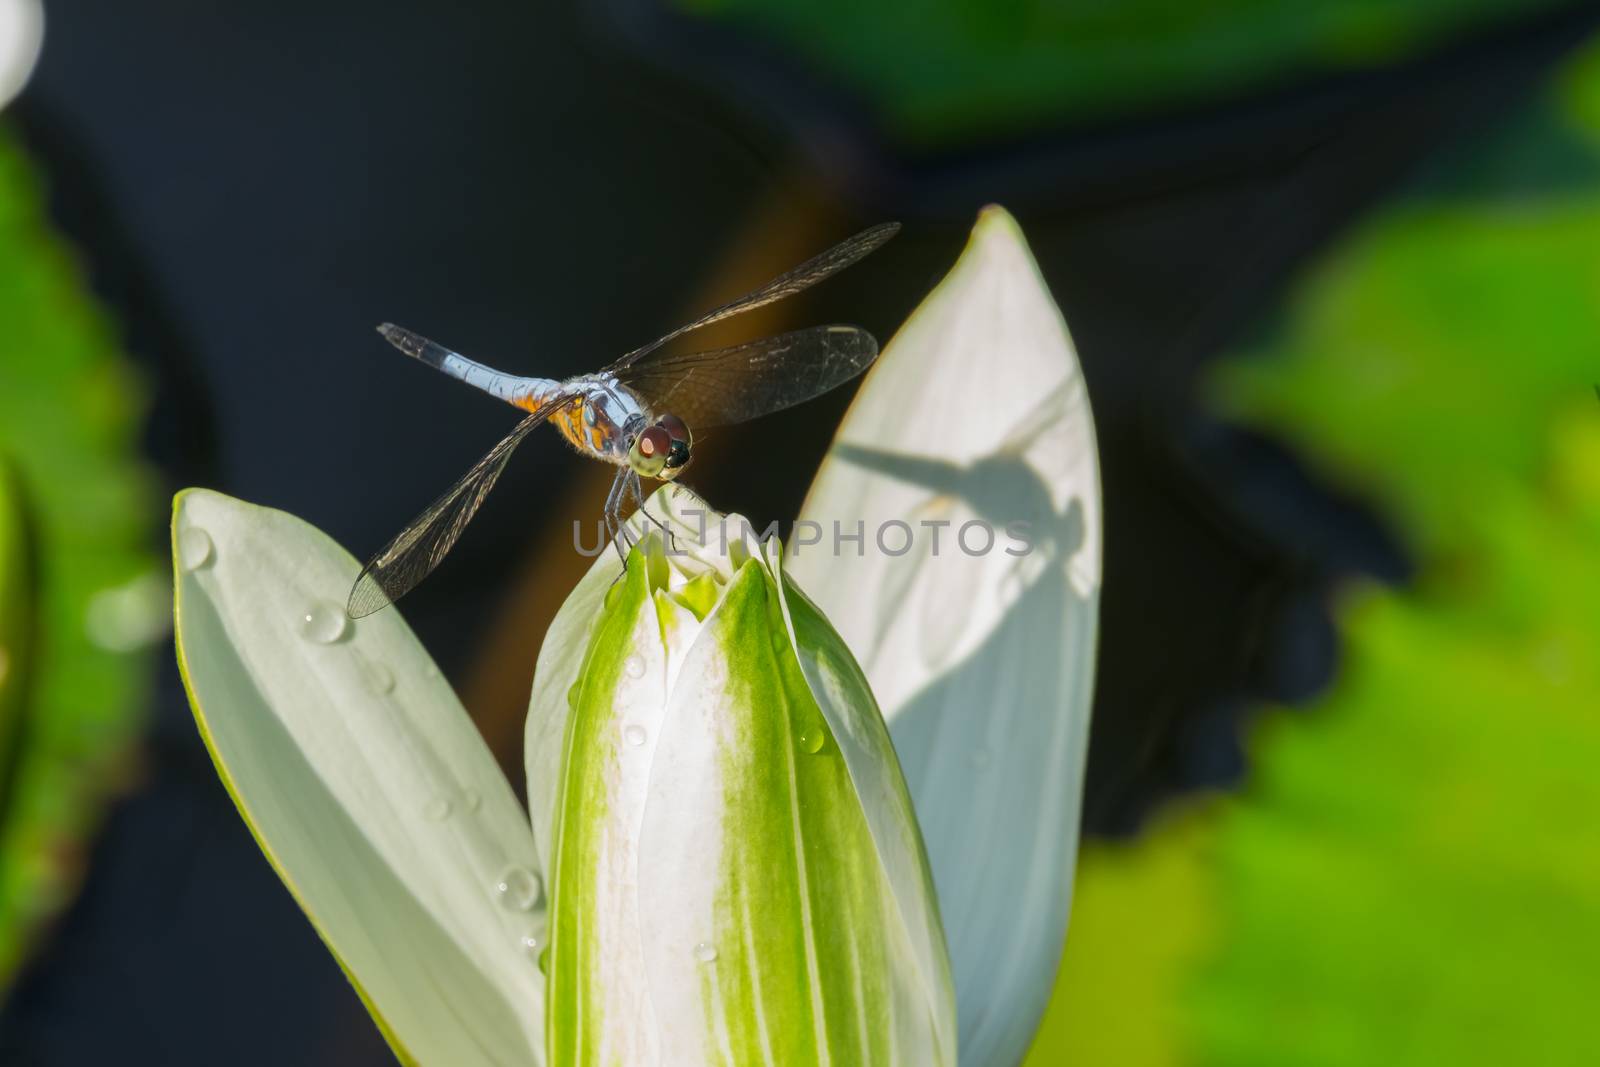 Dragonfly perched on a white lotus